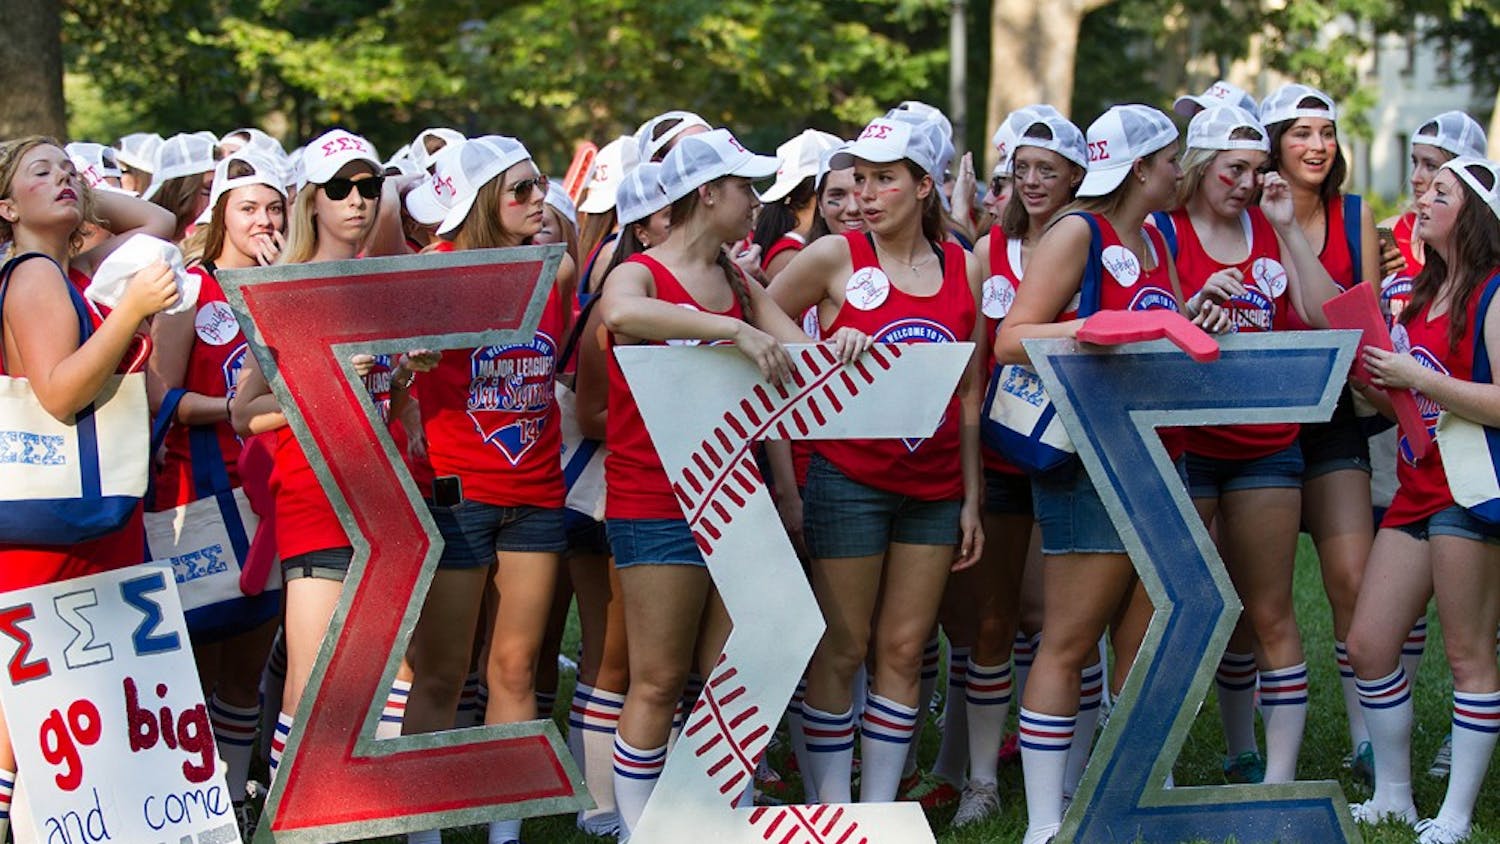 Sigma Sigma Sigma waits to welcome their new members at Bid Day in McCorkle Place.